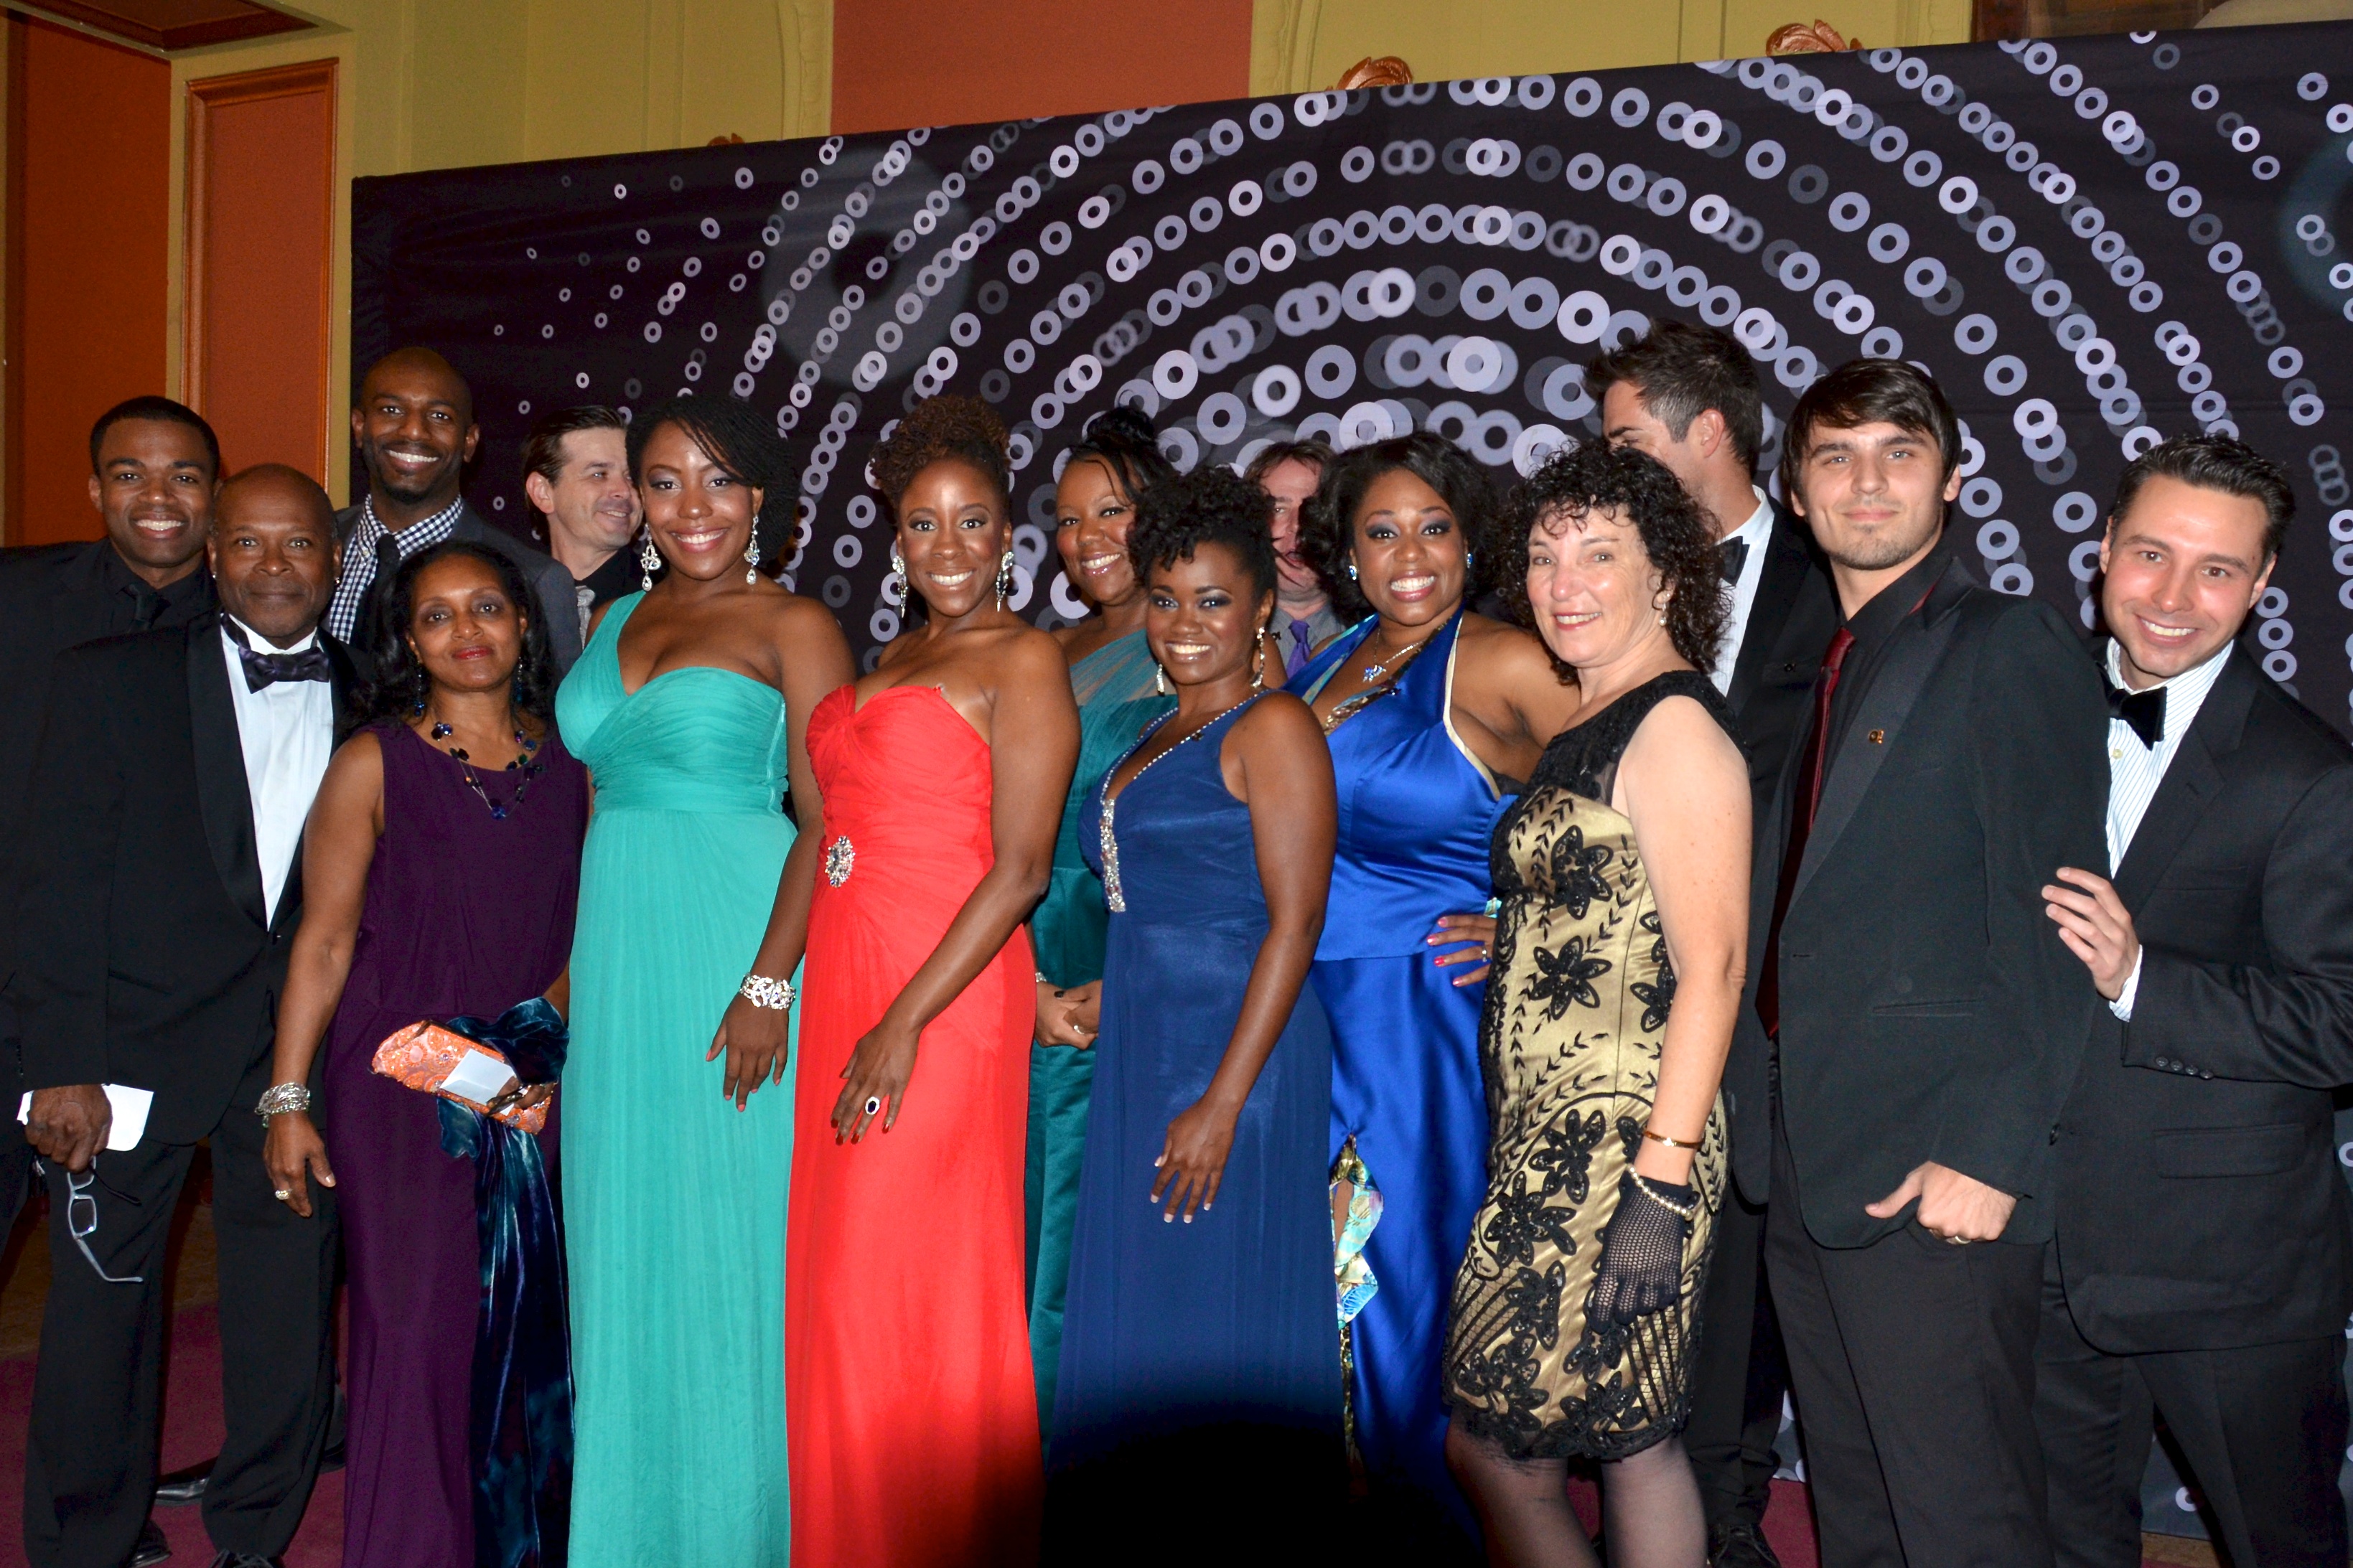 The Historic Los Angeles Theater 2012 Ovation Awards cast of The Color Purple winner of 6 awards